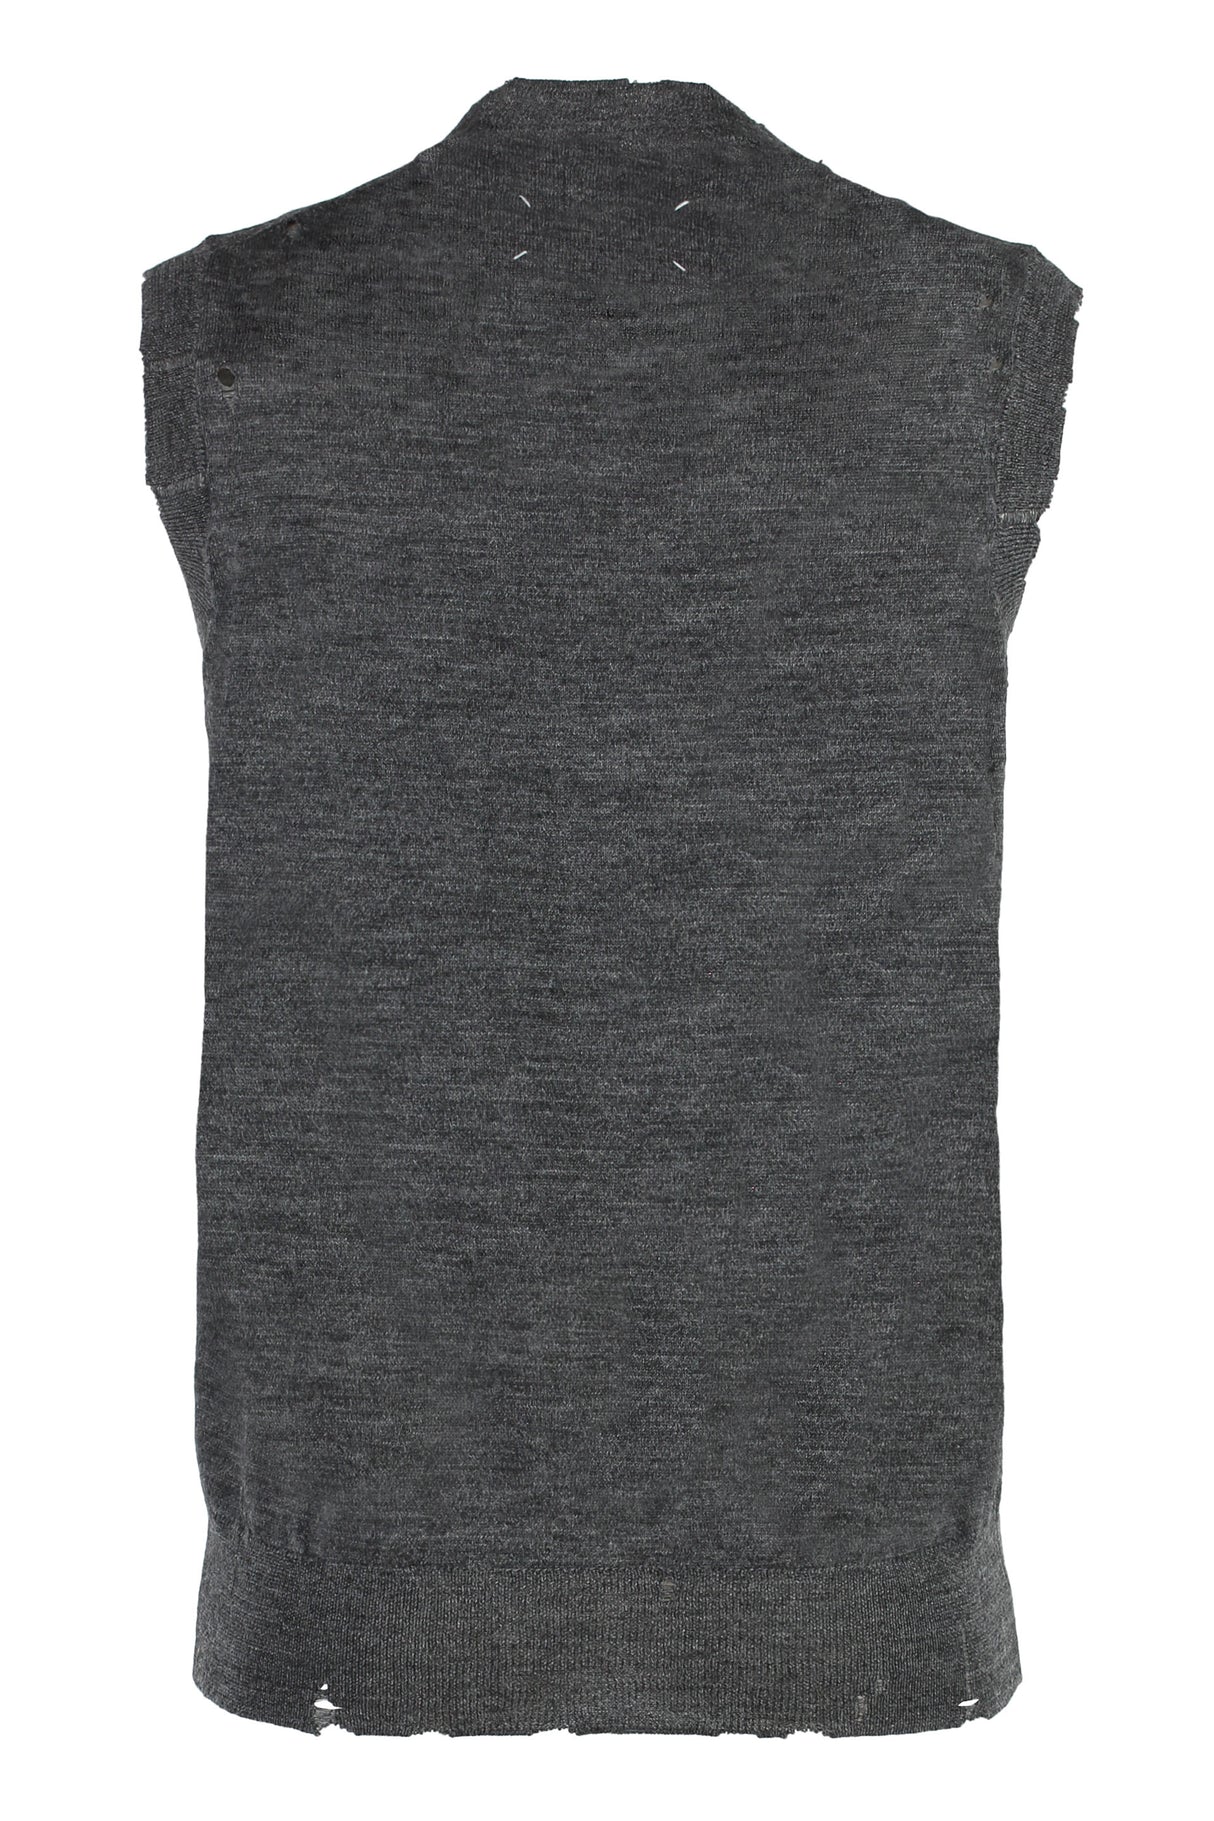 MAISON MARGIELA Grey Knit Wool Vest for Women - FW23 Collection